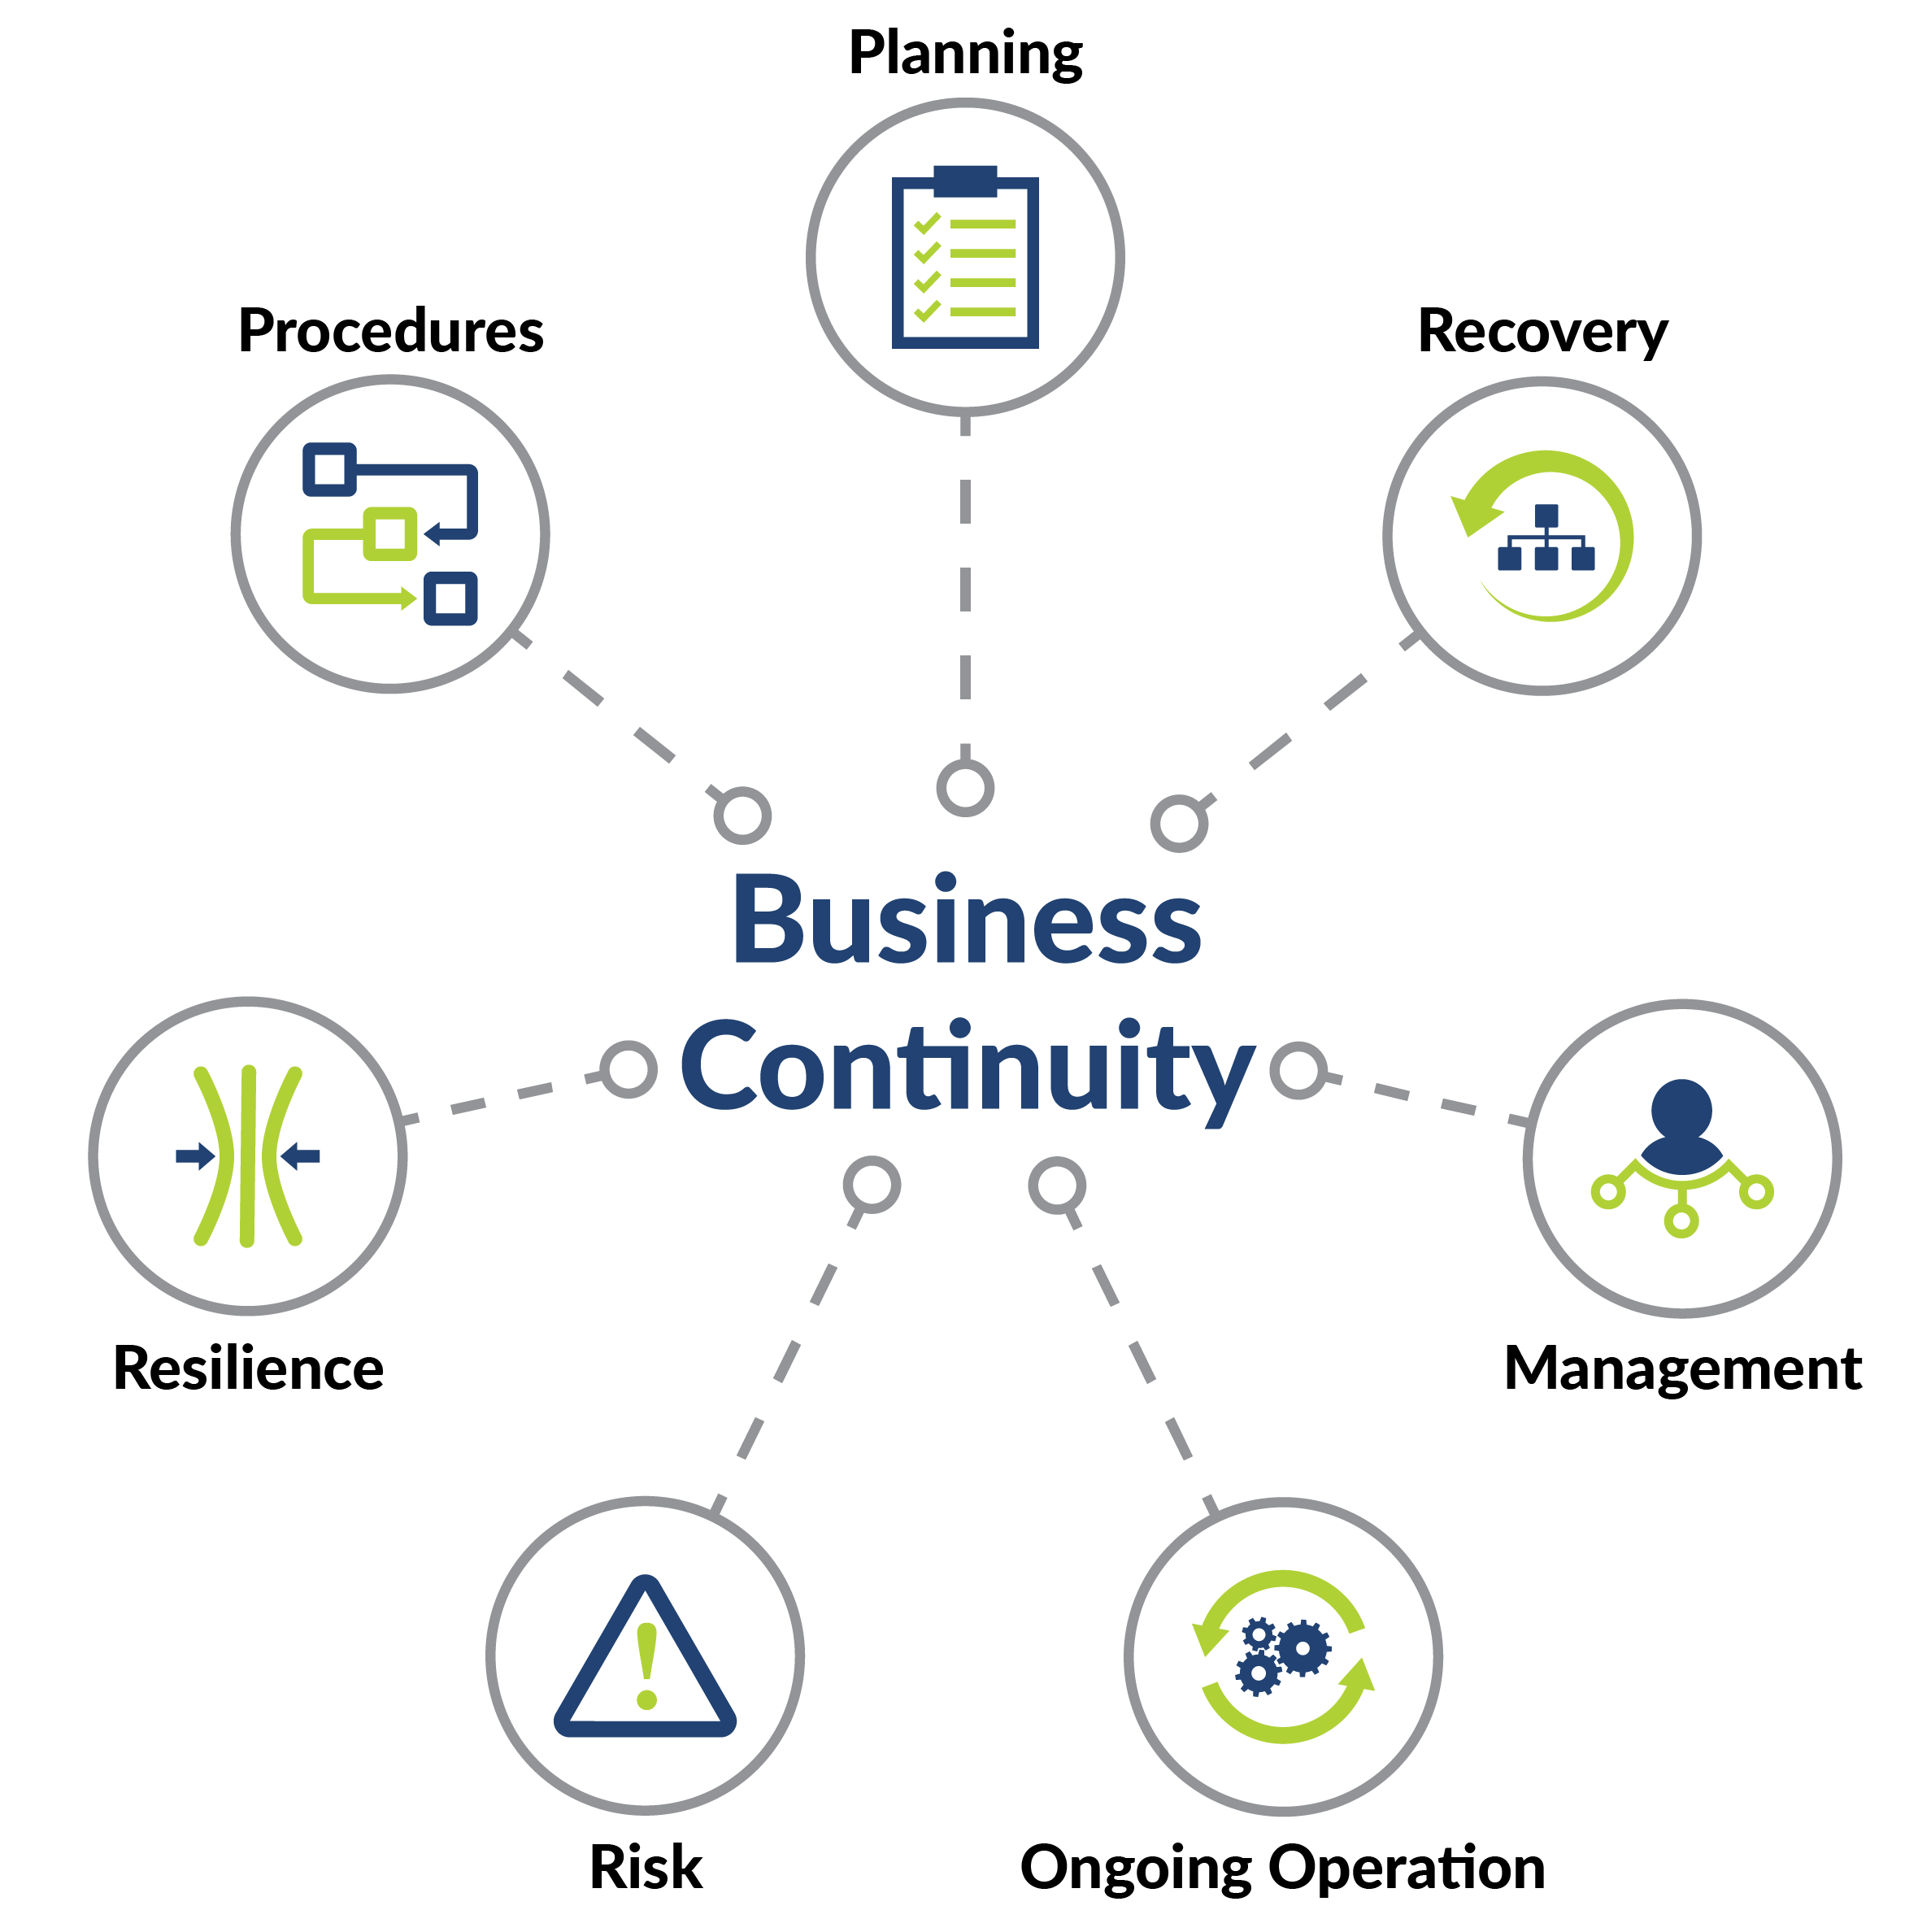 Building a Business Continuity Plan (BCP)